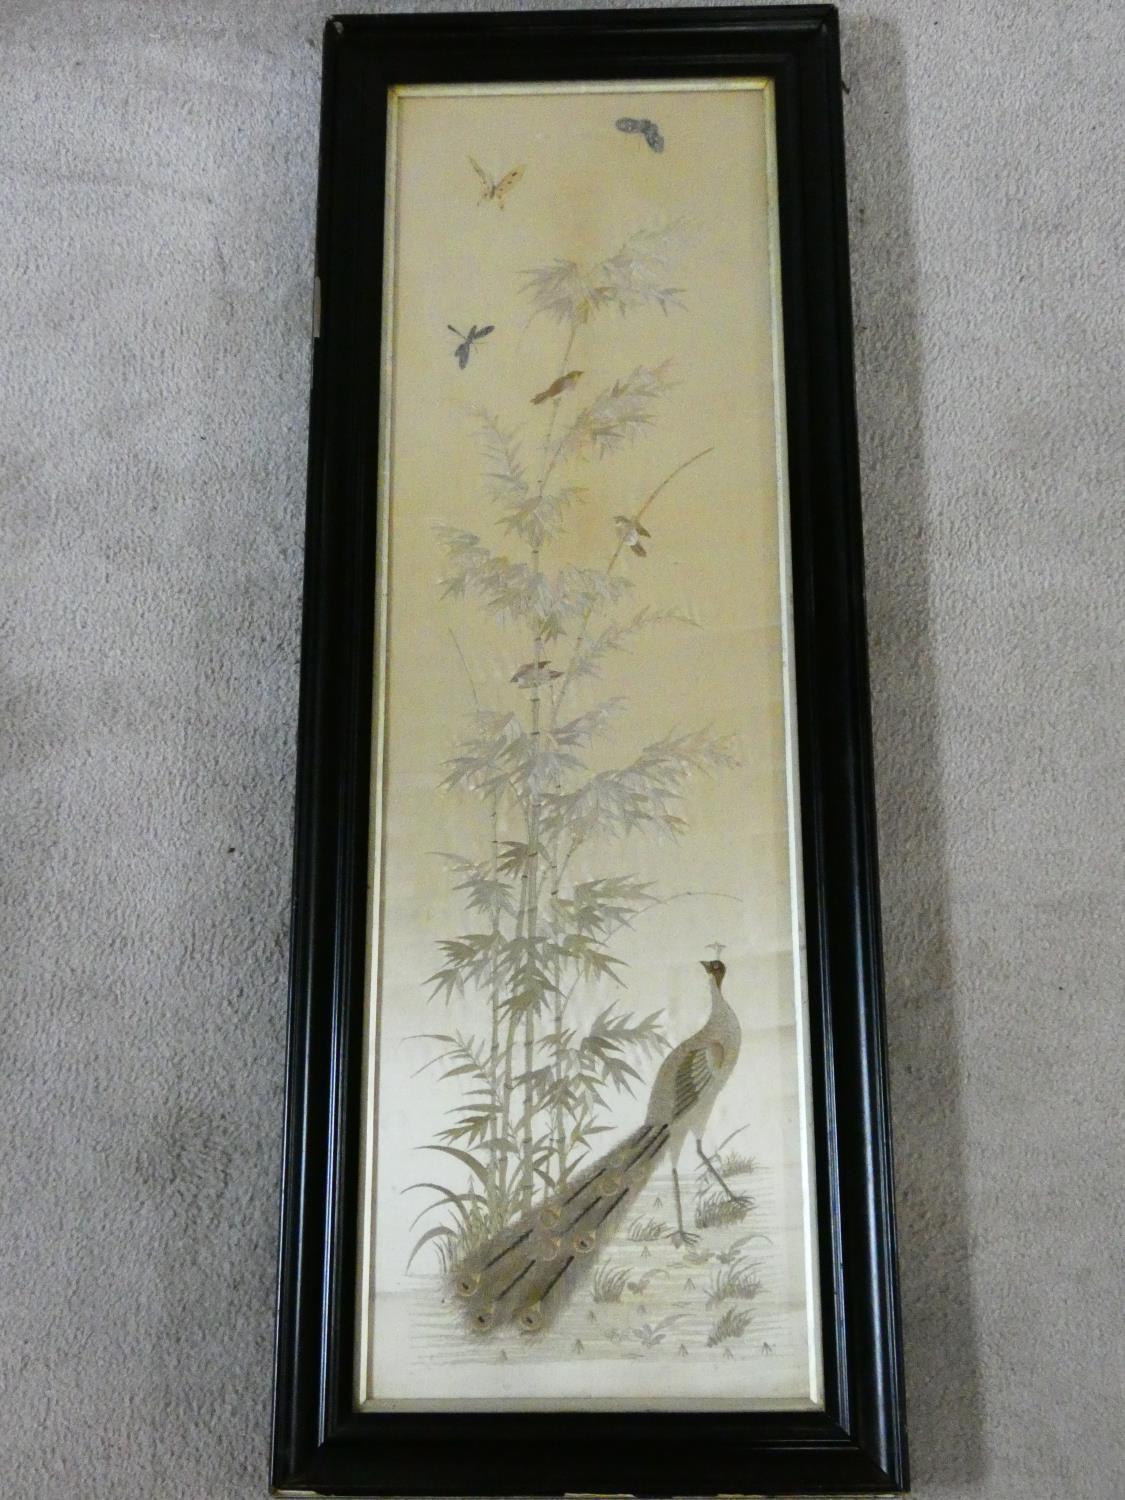 A late 19th century framed and glazed Chinese silk embroidery of a peacock with birds, butterflies